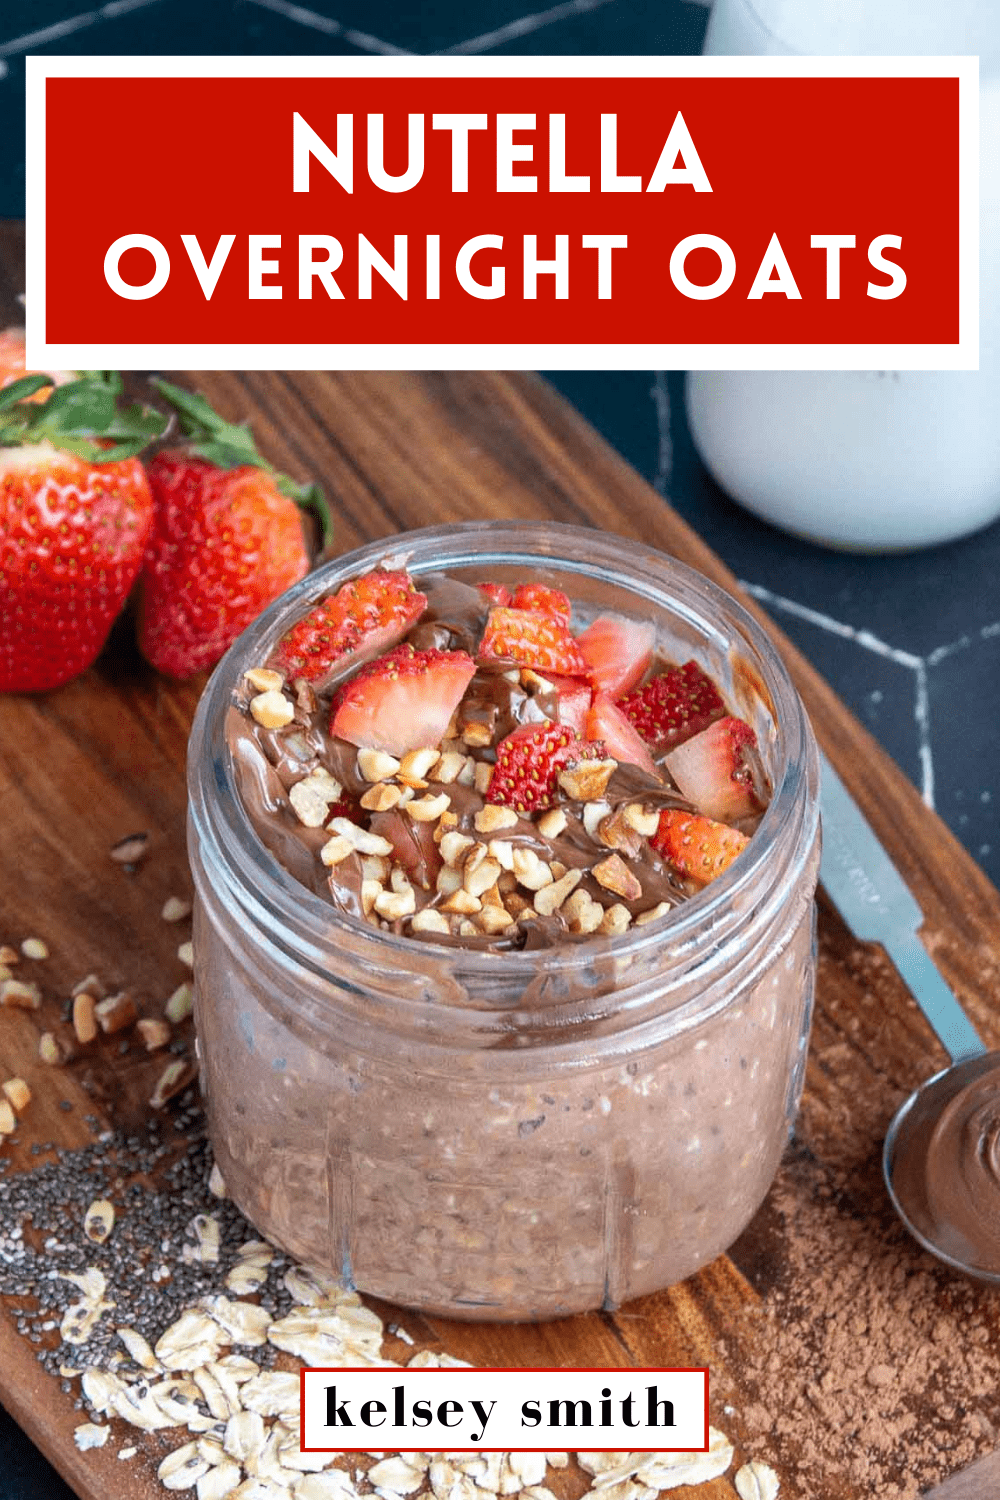 Nutella overnight oats in a mason jar topped with strawberries, Nutella, and hazelnuts. Text at the top of the image says Nutella Overnight Oats.